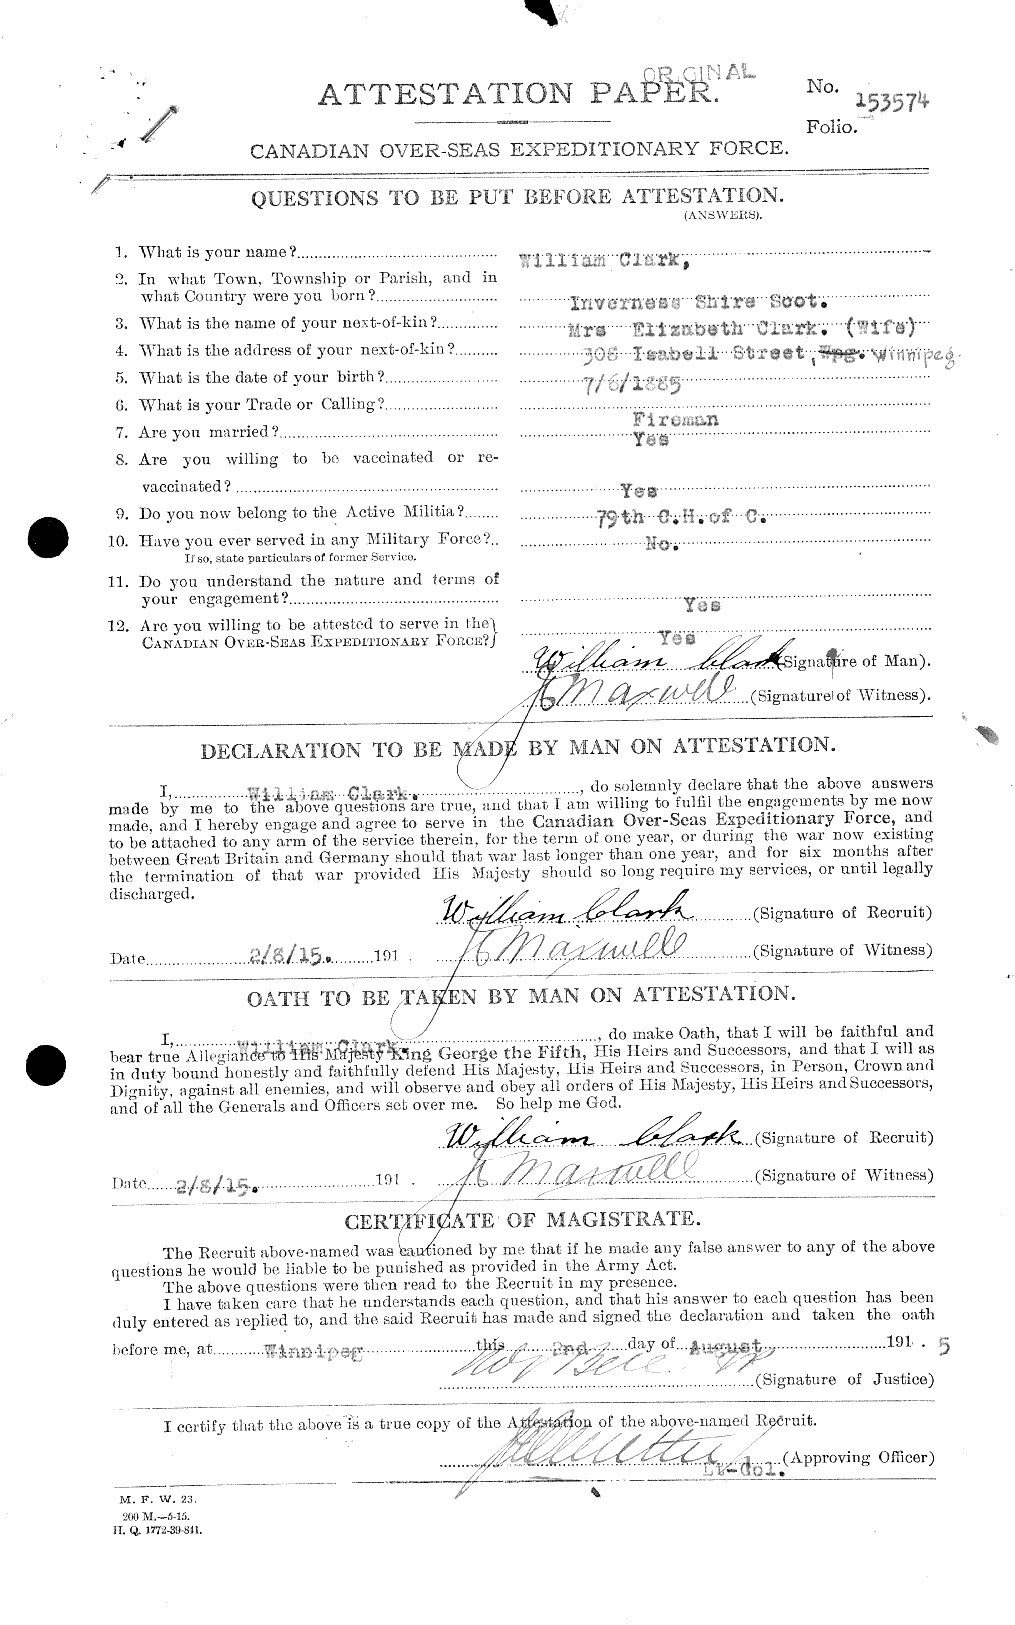 Personnel Records of the First World War - CEF 021345a